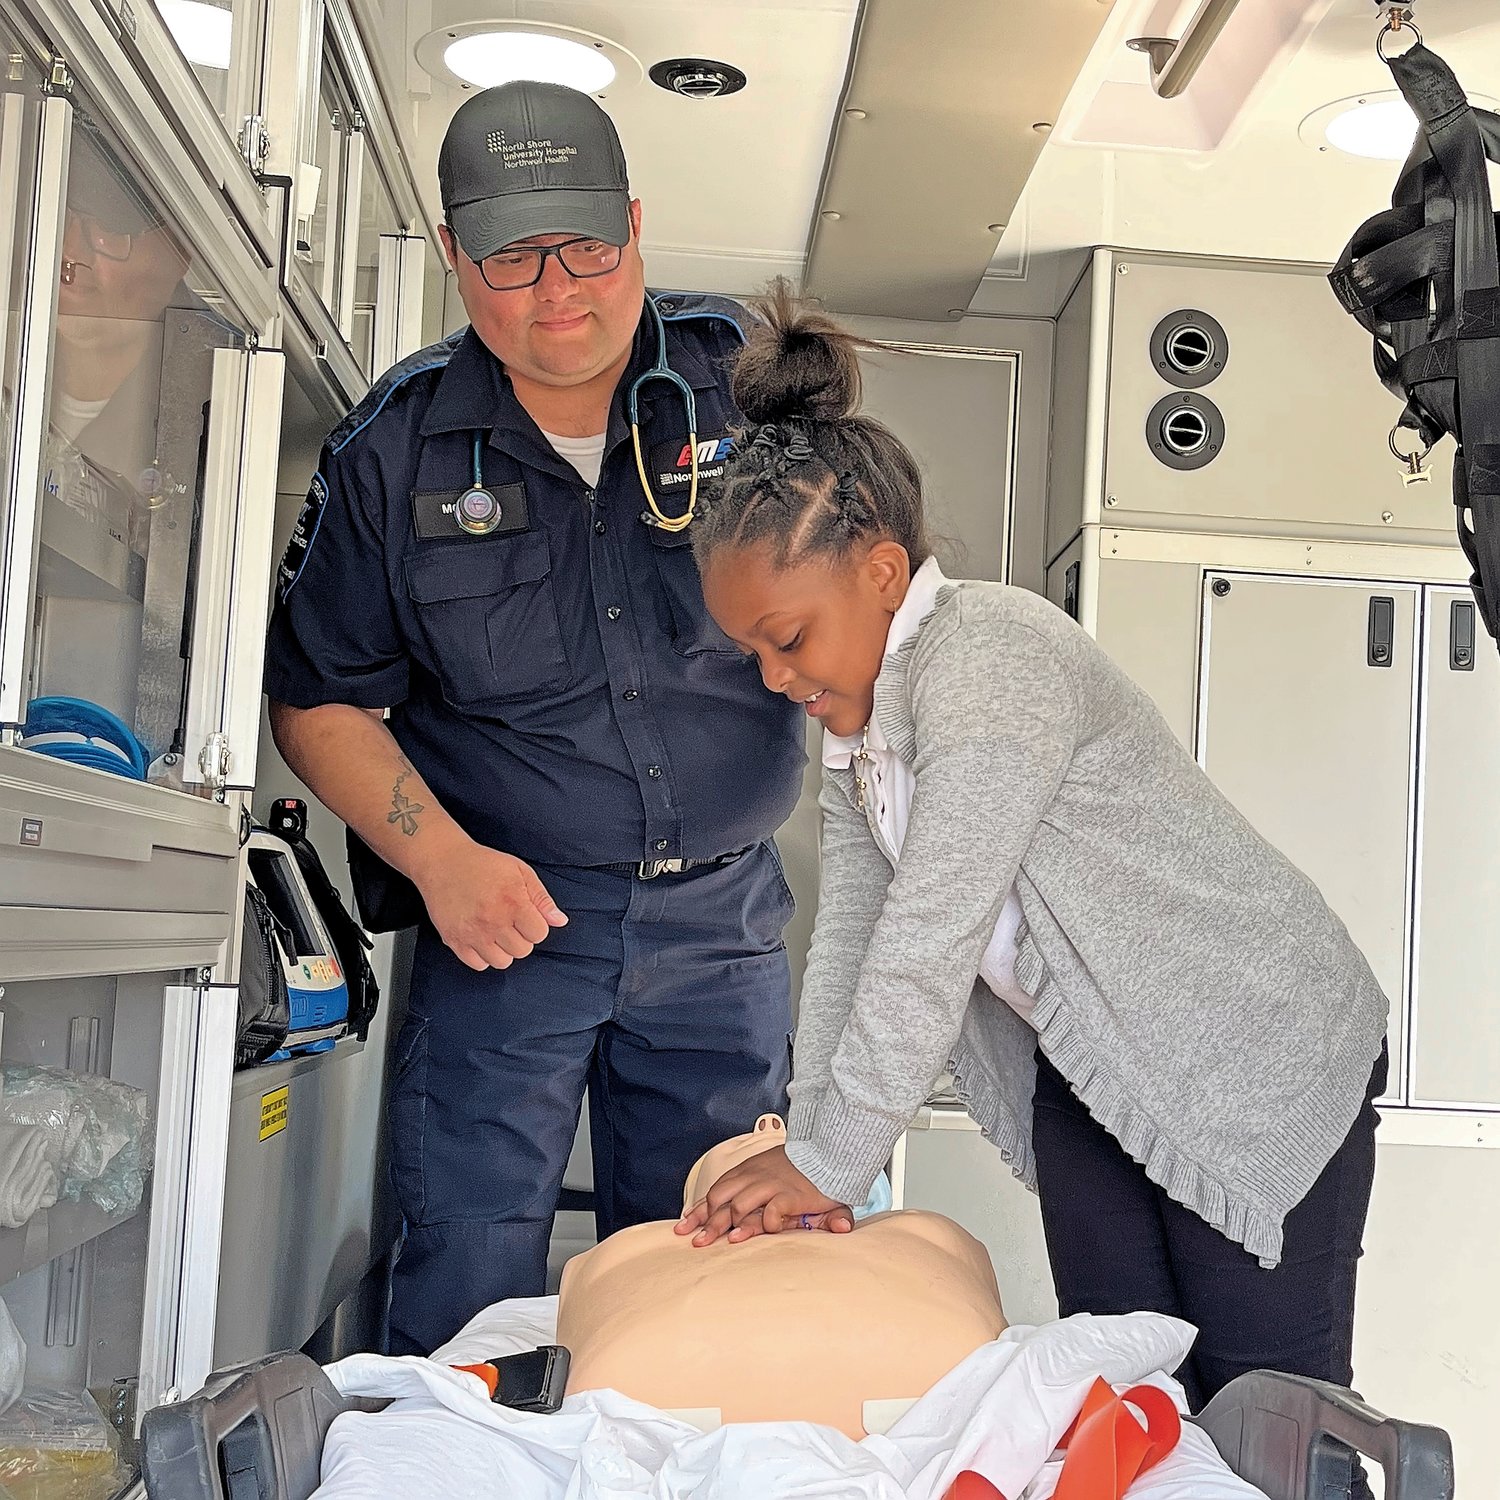 Northwell Paramedic Michael Morales looks on as 10-year-old Kayli-Aneek Skyla of David Patterson School in Hempstead practices compression on a CPR mannequin in the back of an ambulance. Skyla was taking part in a Career Day at David Paterson School on June 9. Other careers included police detective, public service, nursing, teaching and the law.